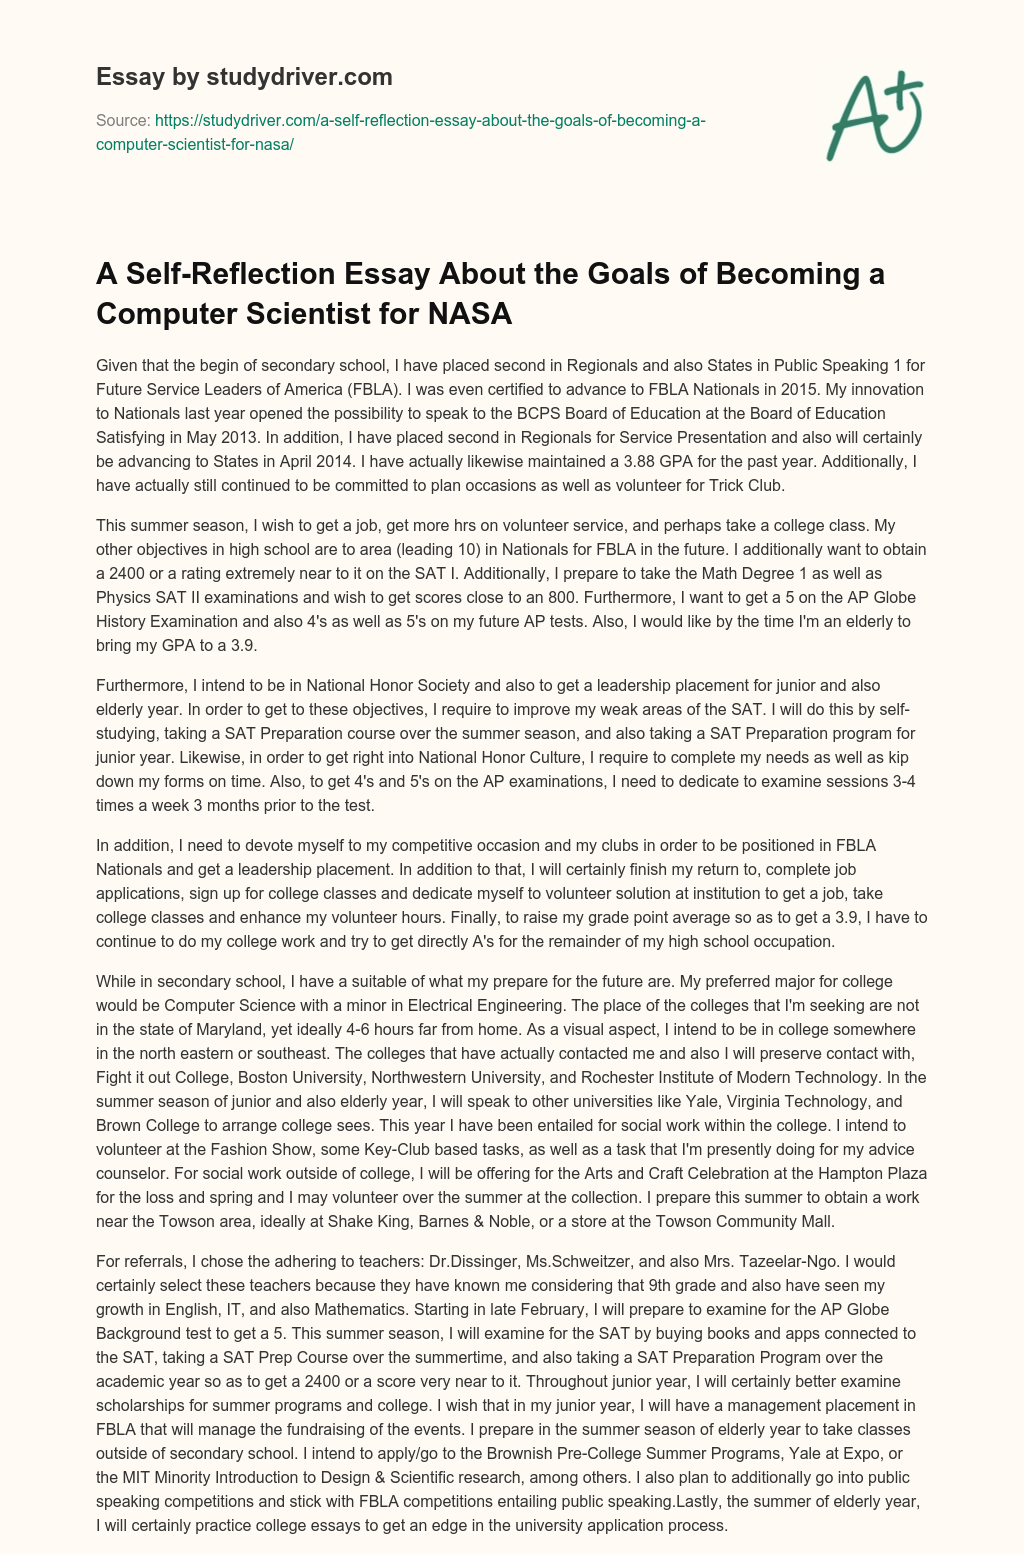 A Self-Reflection Essay about the Goals of Becoming a Computer Scientist for NASA essay